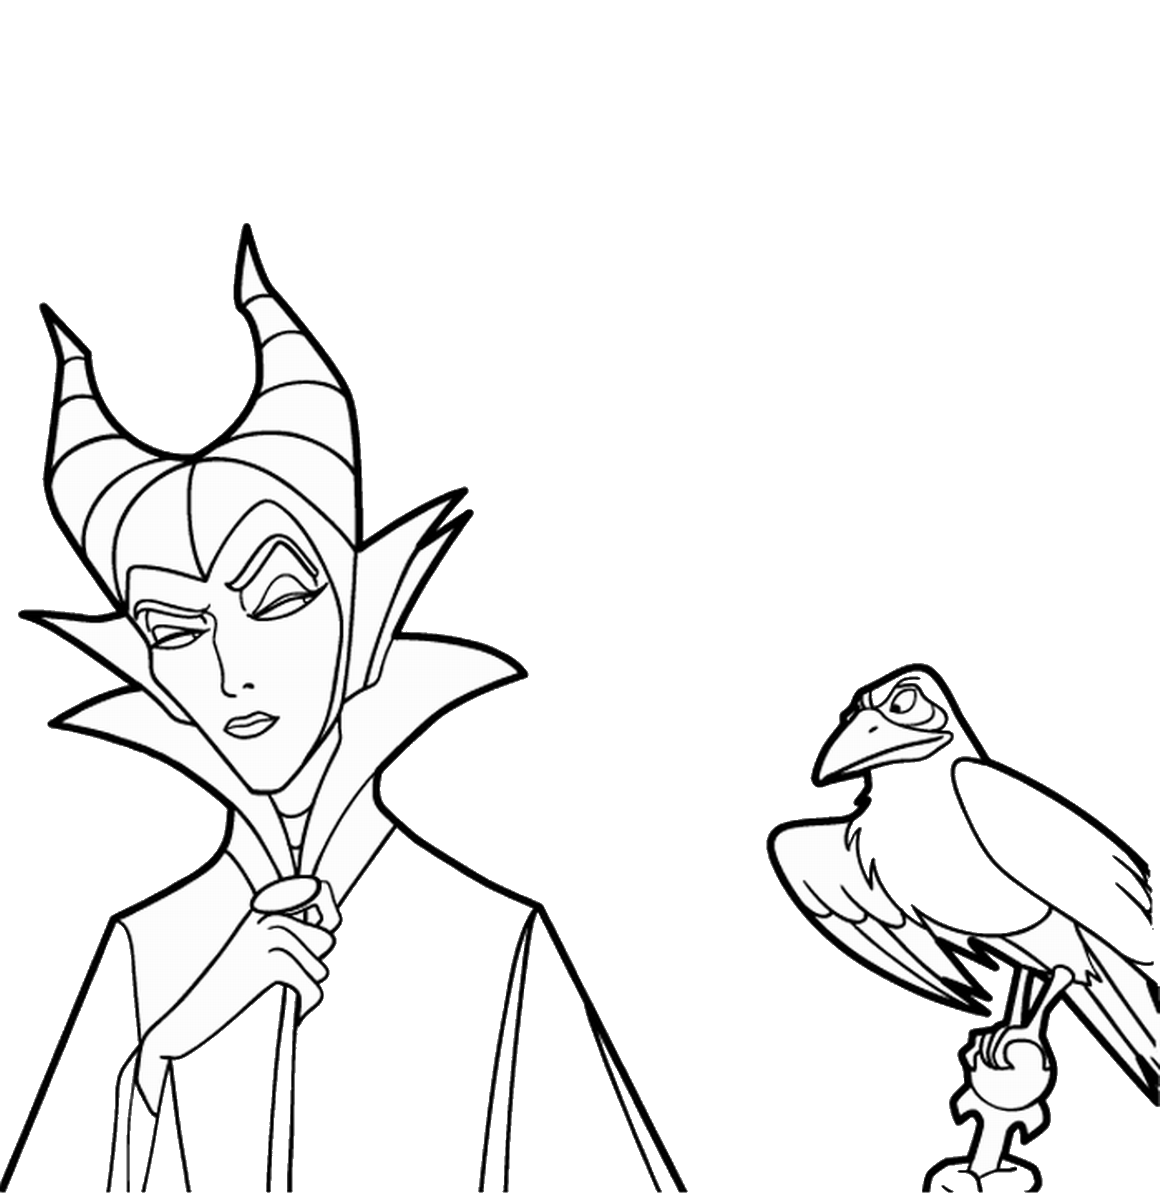 Maleficent Coloring Pages TV Film Maleficent_coloring7 Printable 2020 04829 Coloring4free